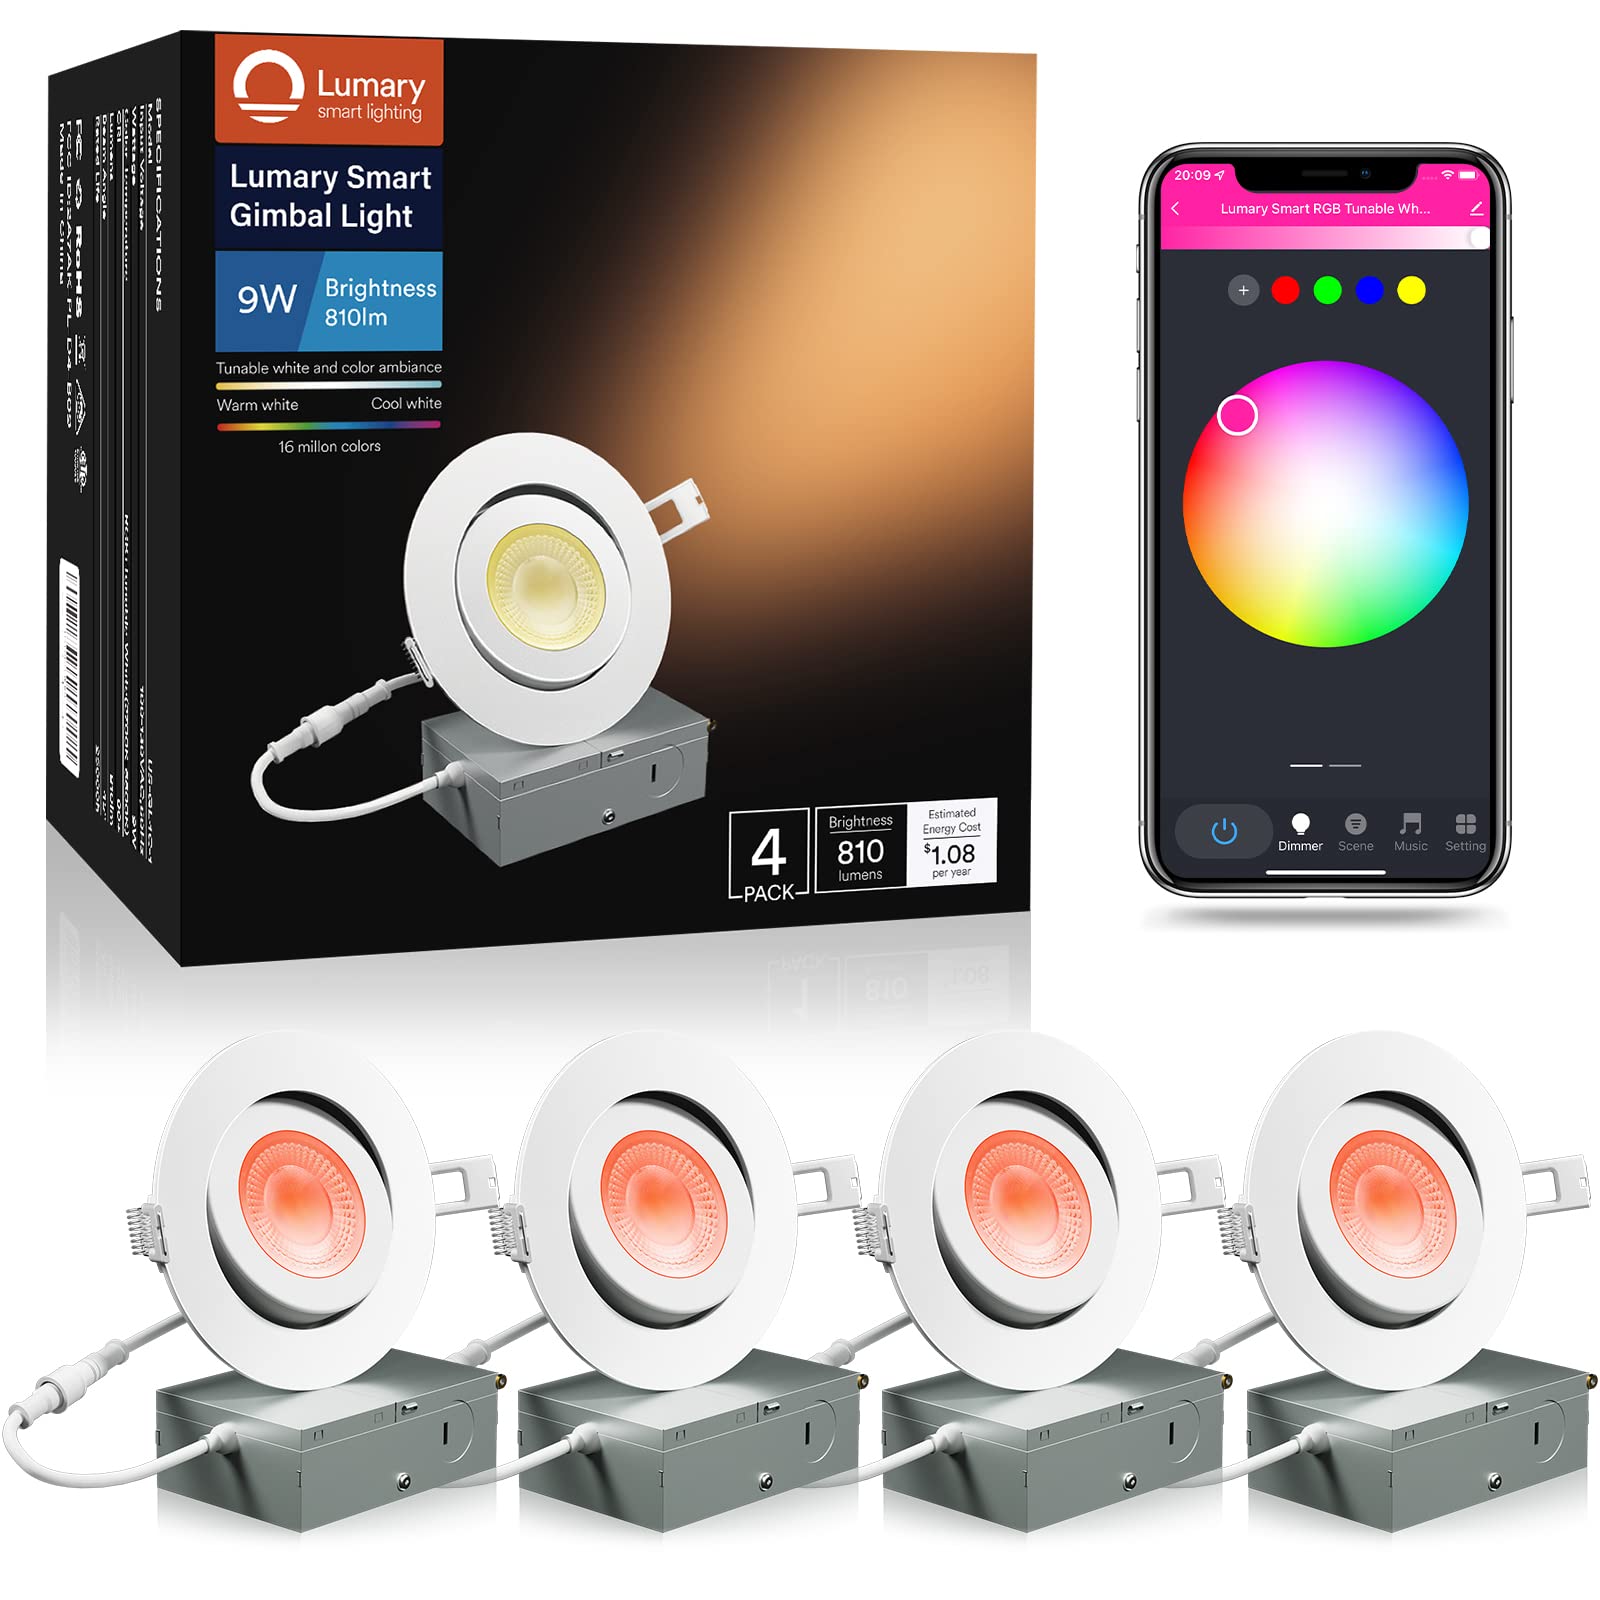 Lumary Smart Recessed Lighting 4 Inch - 9W 810 Lumens Gimbal Canless Recessed Lighting Color Changing Dimmable 2700K to 6500K RGB Wafer Lights Work with Alexa/Google Assistant ETL Certified 4 Pcs